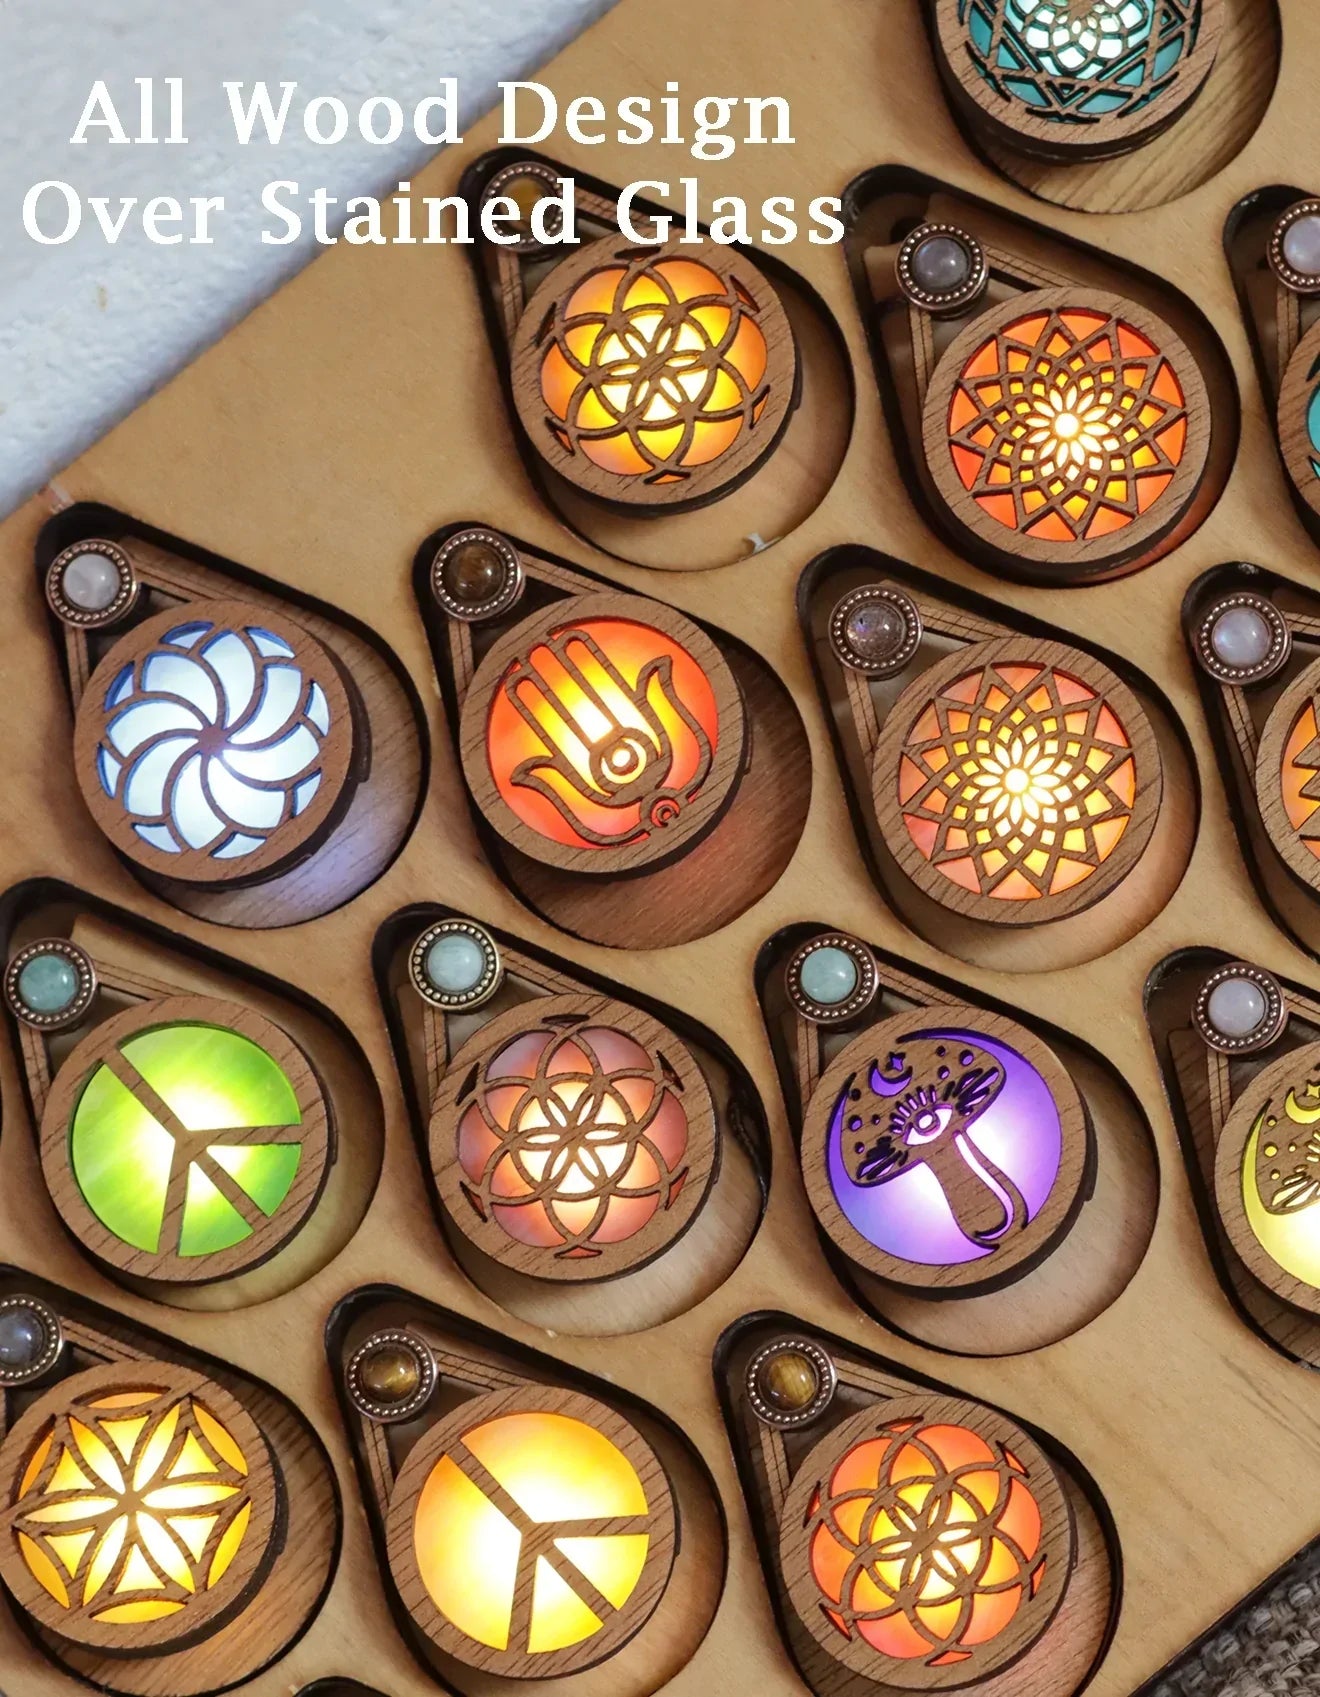 Glowing Iridescent Stained Glass Wooden LED Pendant | Dream Web